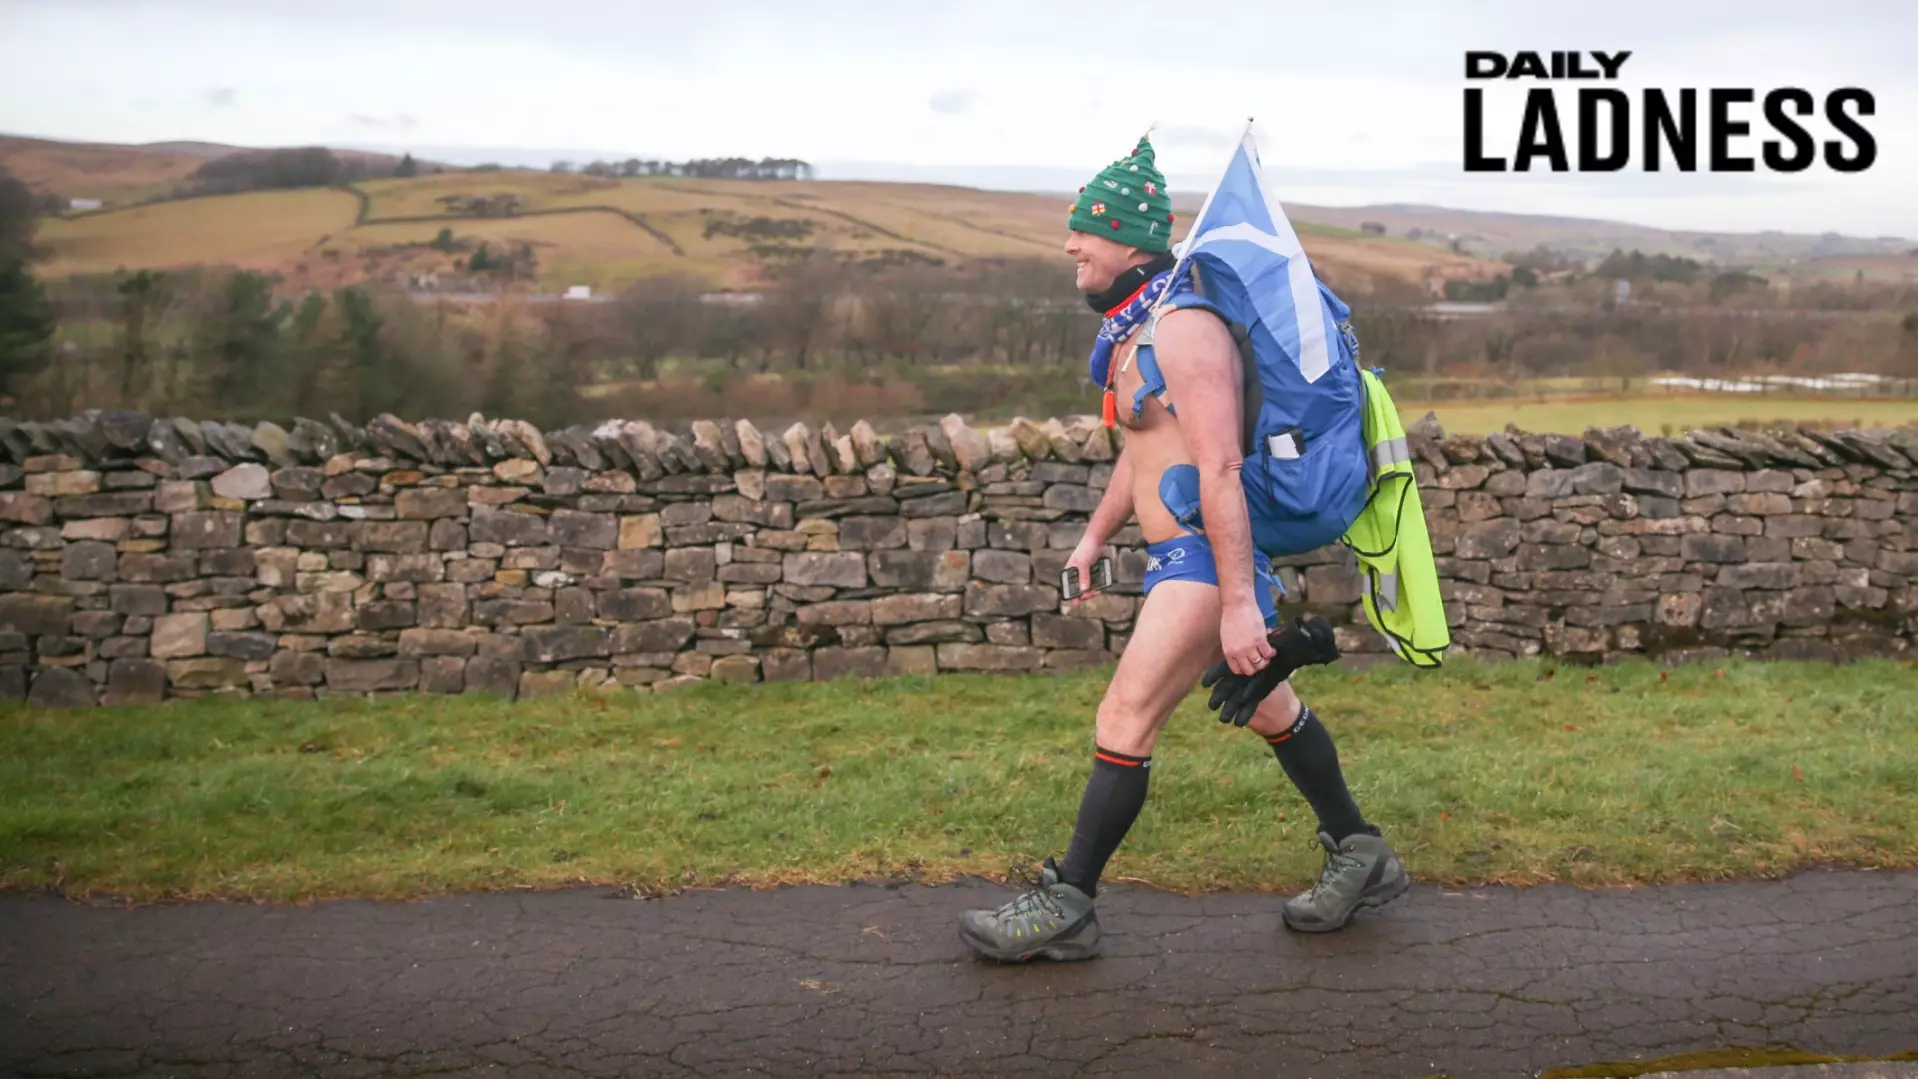 Man Walking 1,000 Miles Wearing A Tiny Pair Of Speedos To Raise Money For Charity 